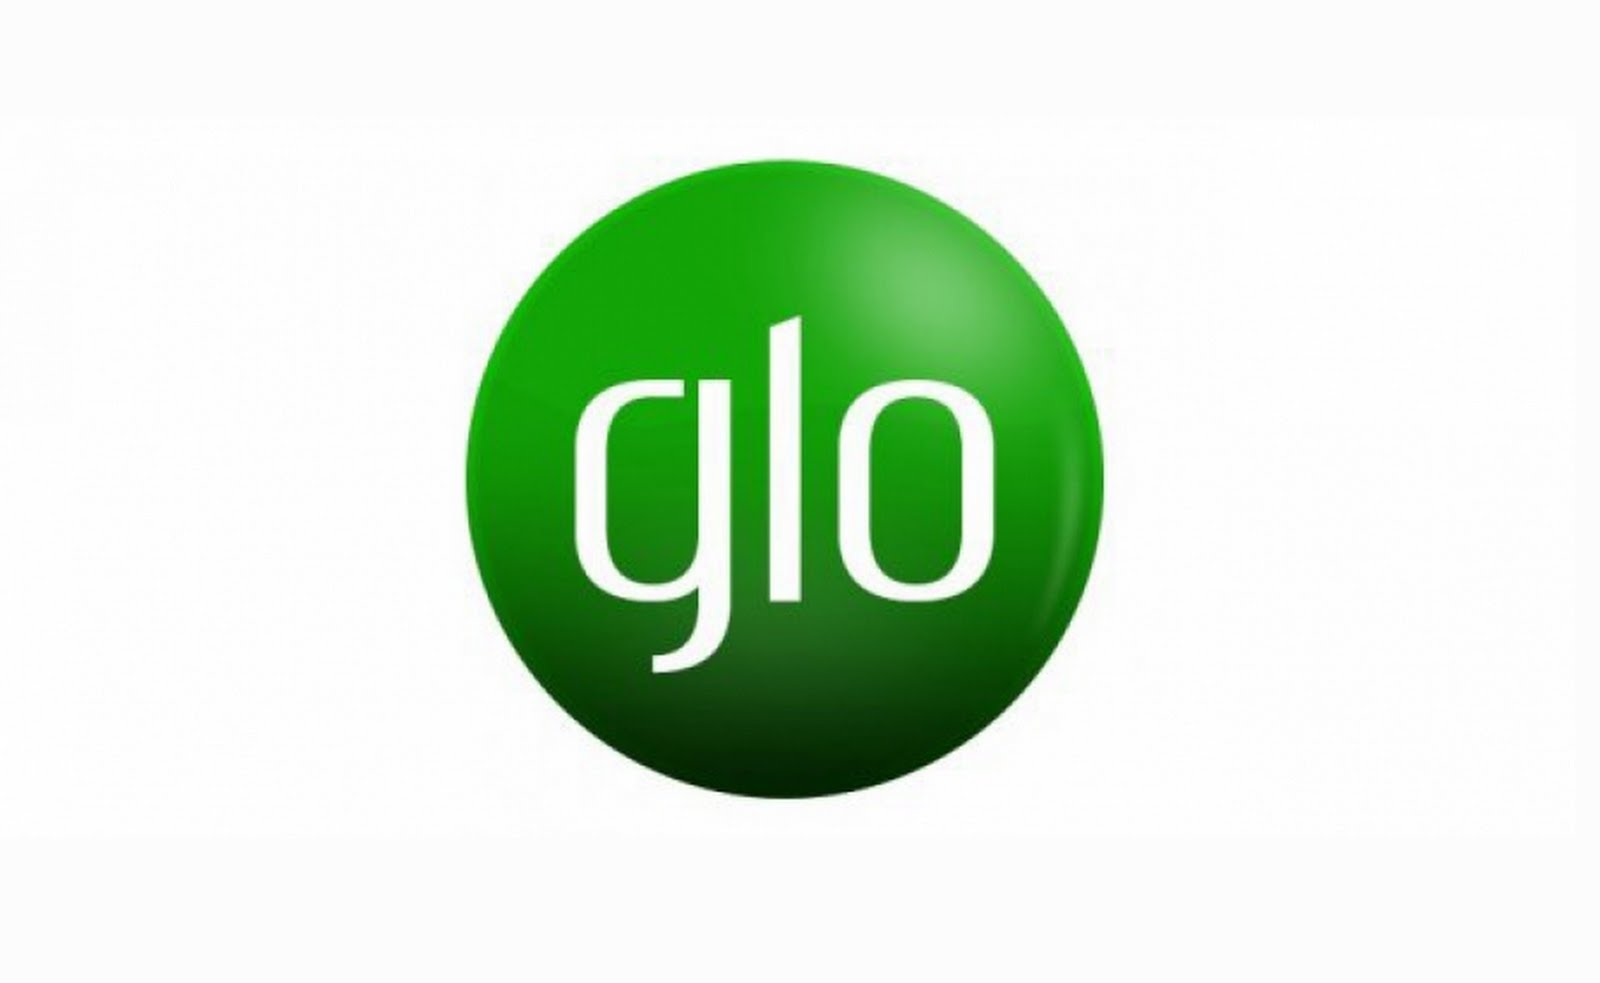 How to check your Glo Ghana phone number